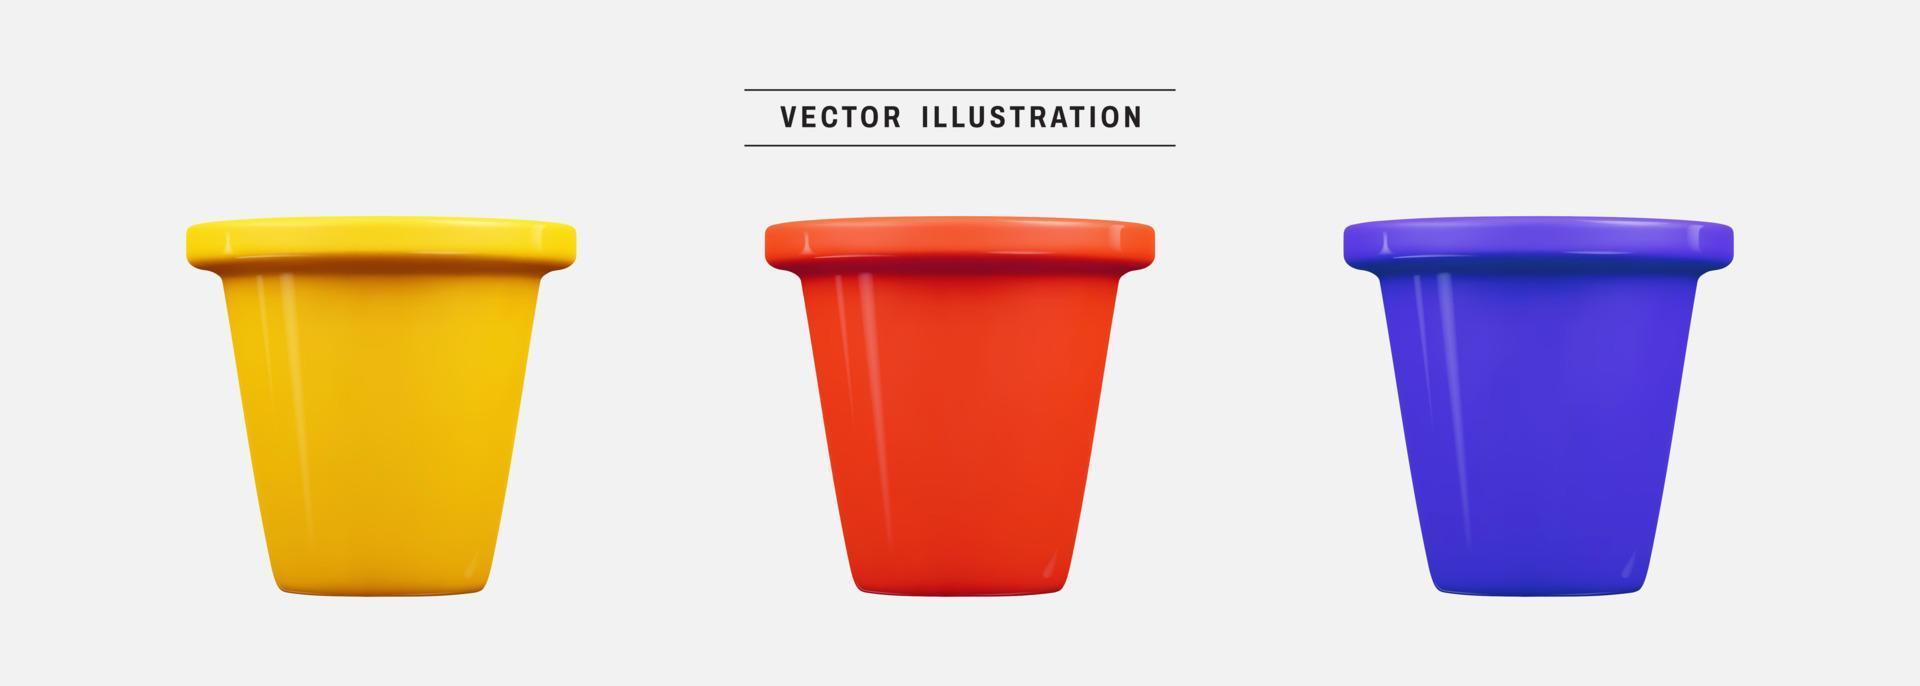 Flower pot 3d icon render. realistic design elements collection. vector illustration in cartoon minimal style